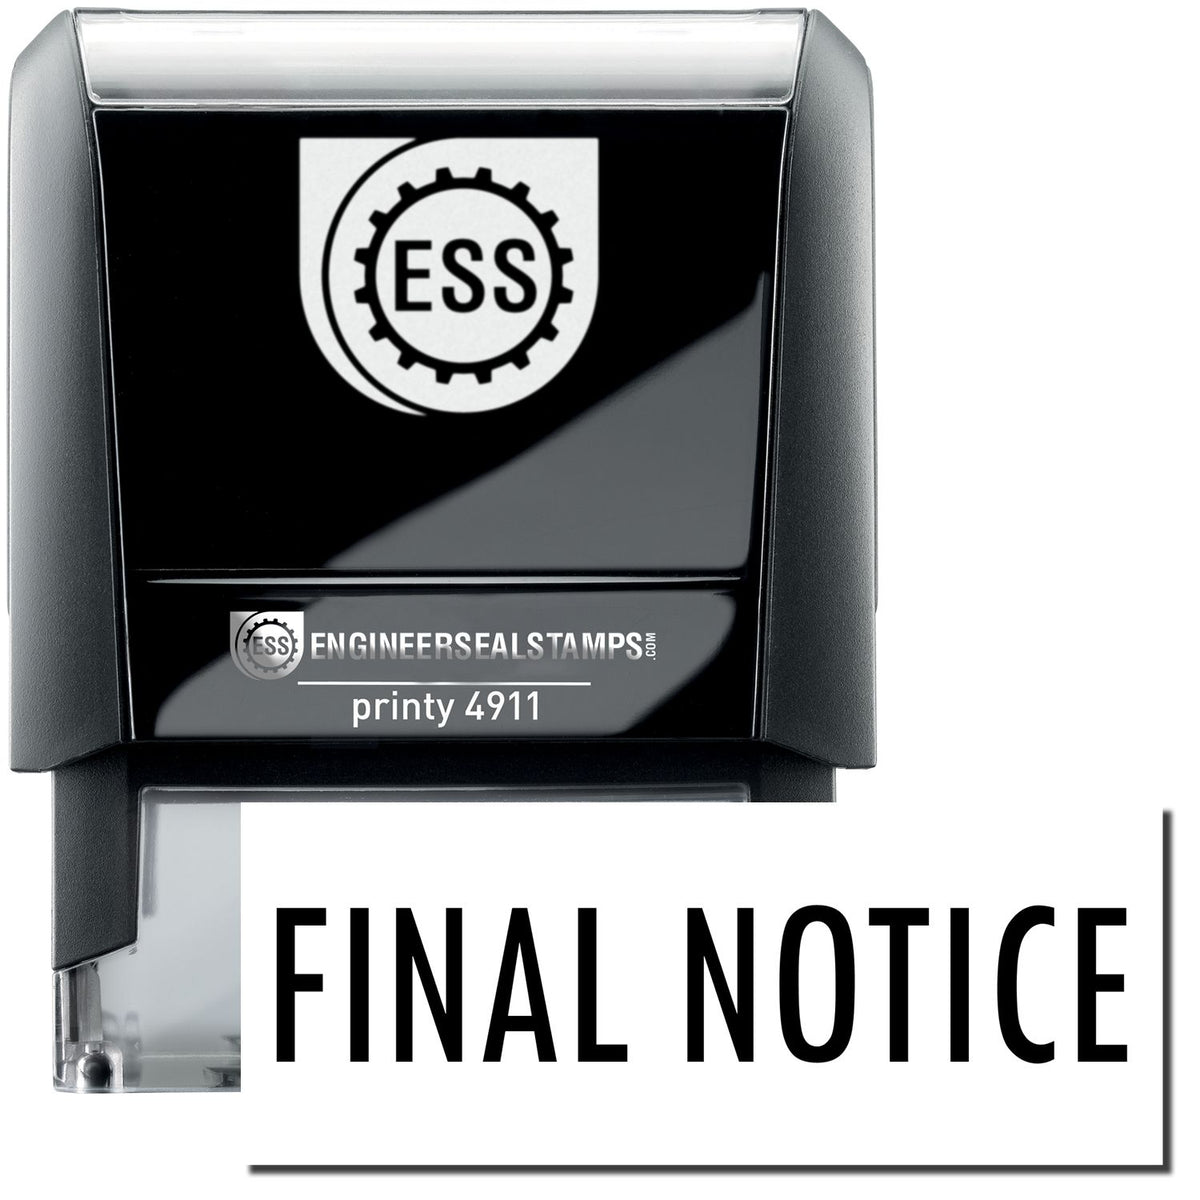 A self-inking stamp with a stamped image showing how the text &quot;FINAL NOTICE&quot; is displayed after stamping.